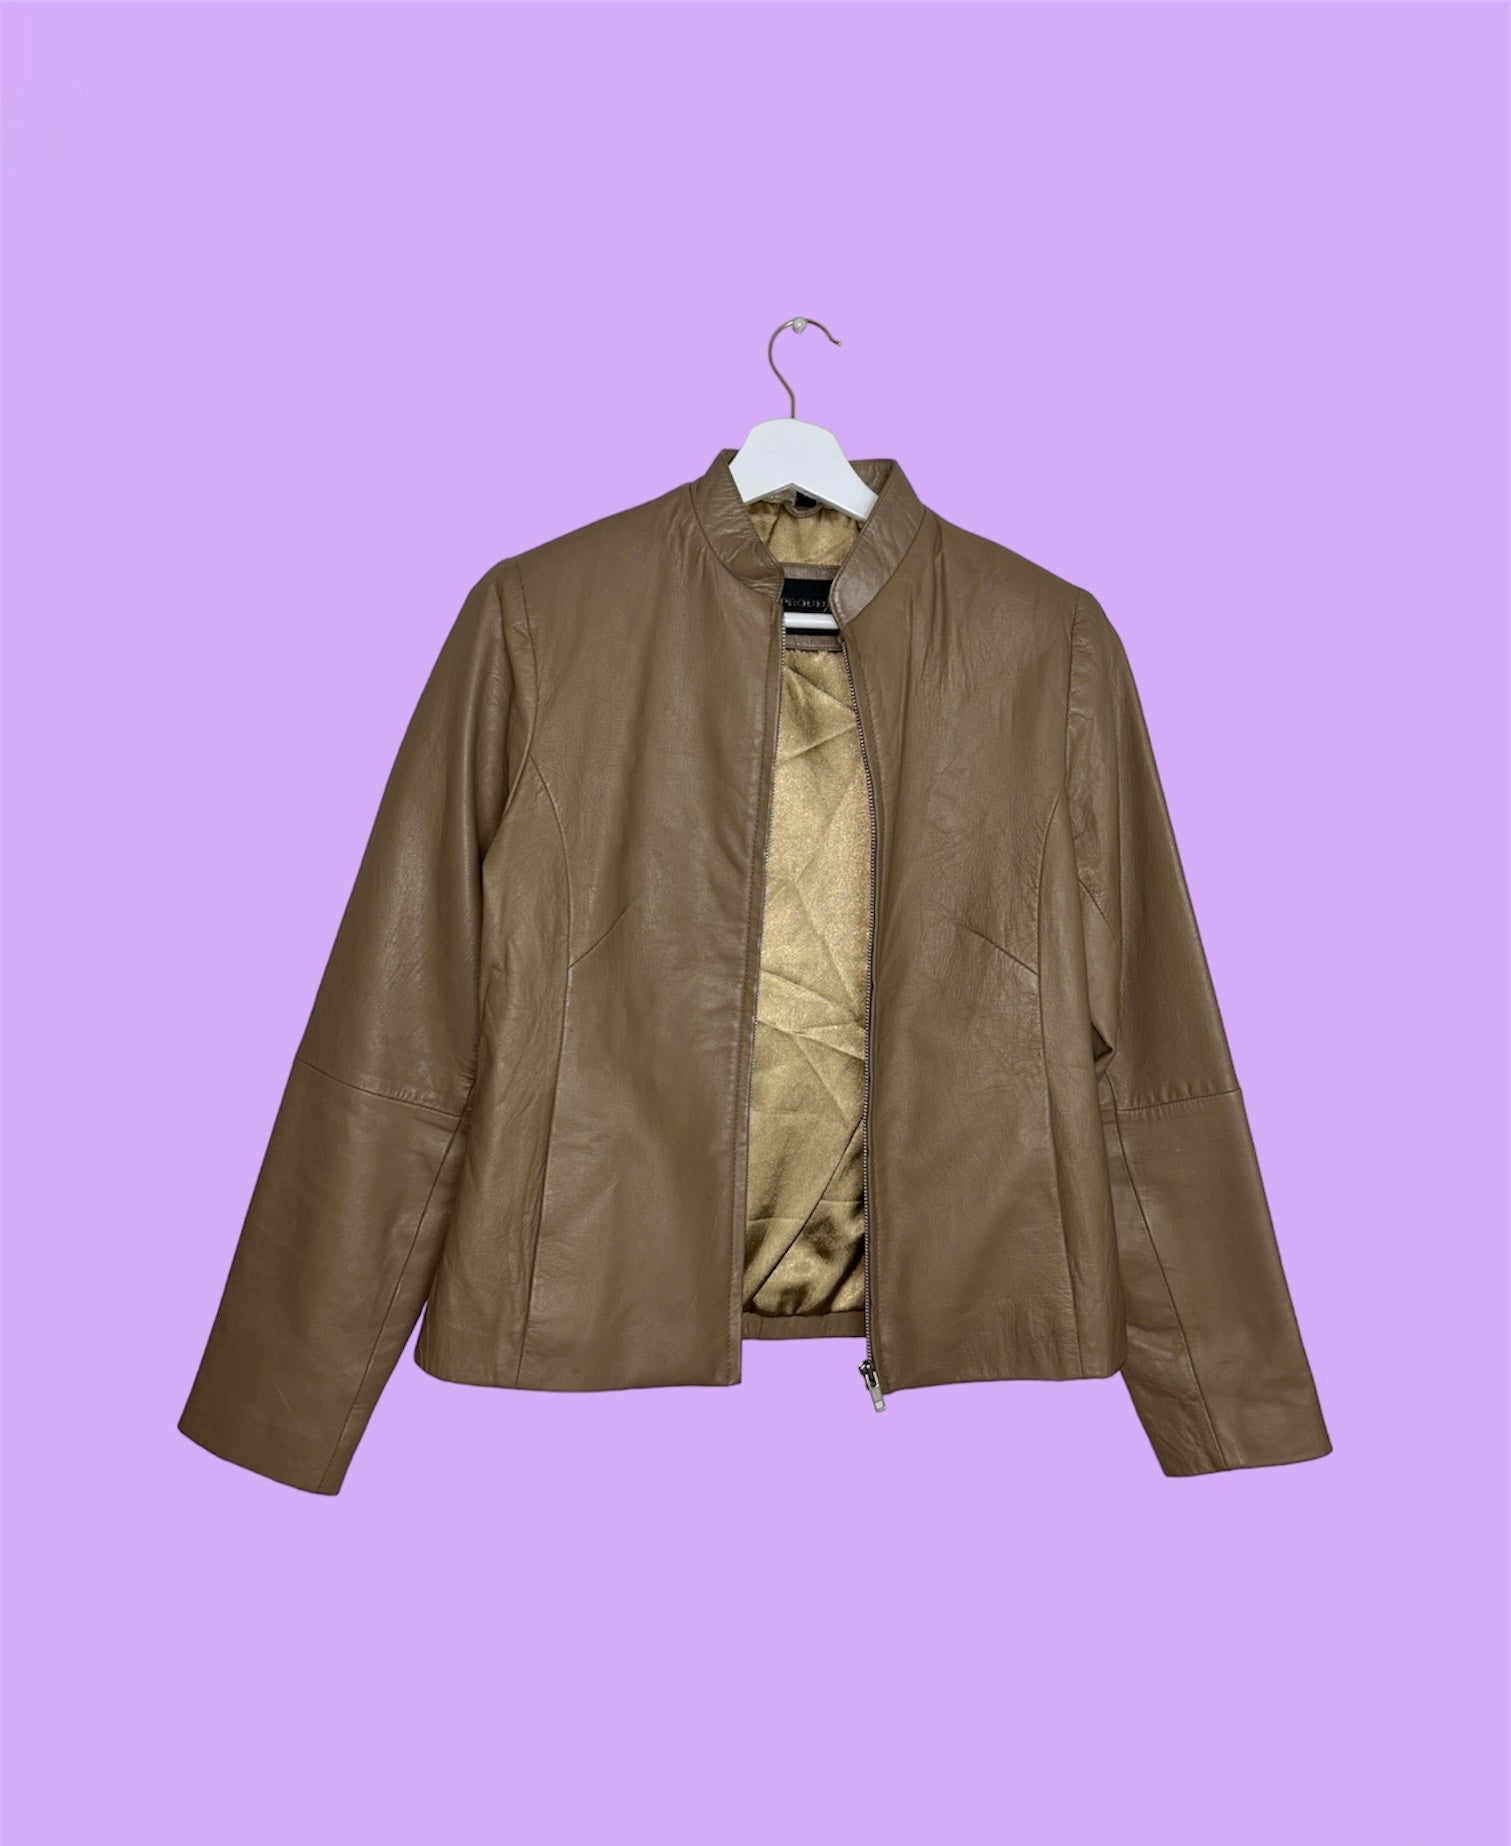 tan beige real leather jacket shown on a lilac background